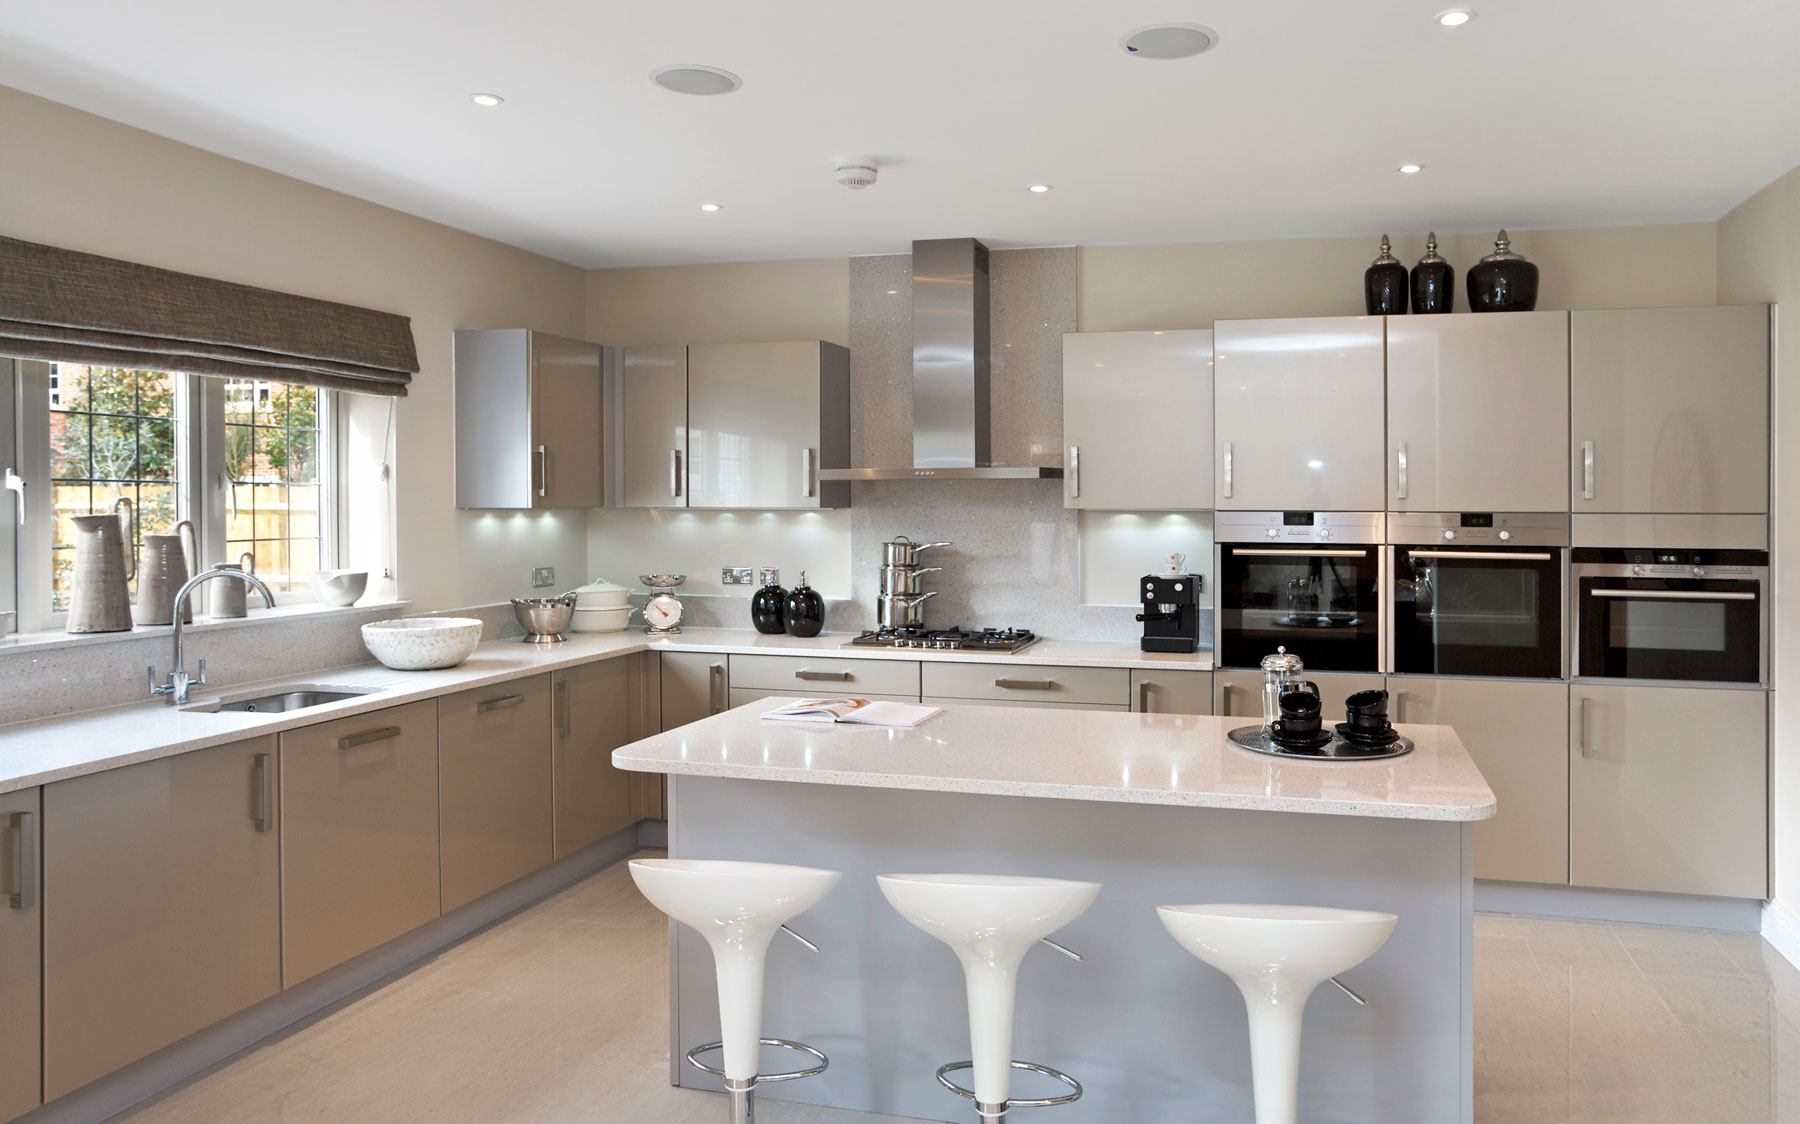 Grey kitchen with white marble island in the centre